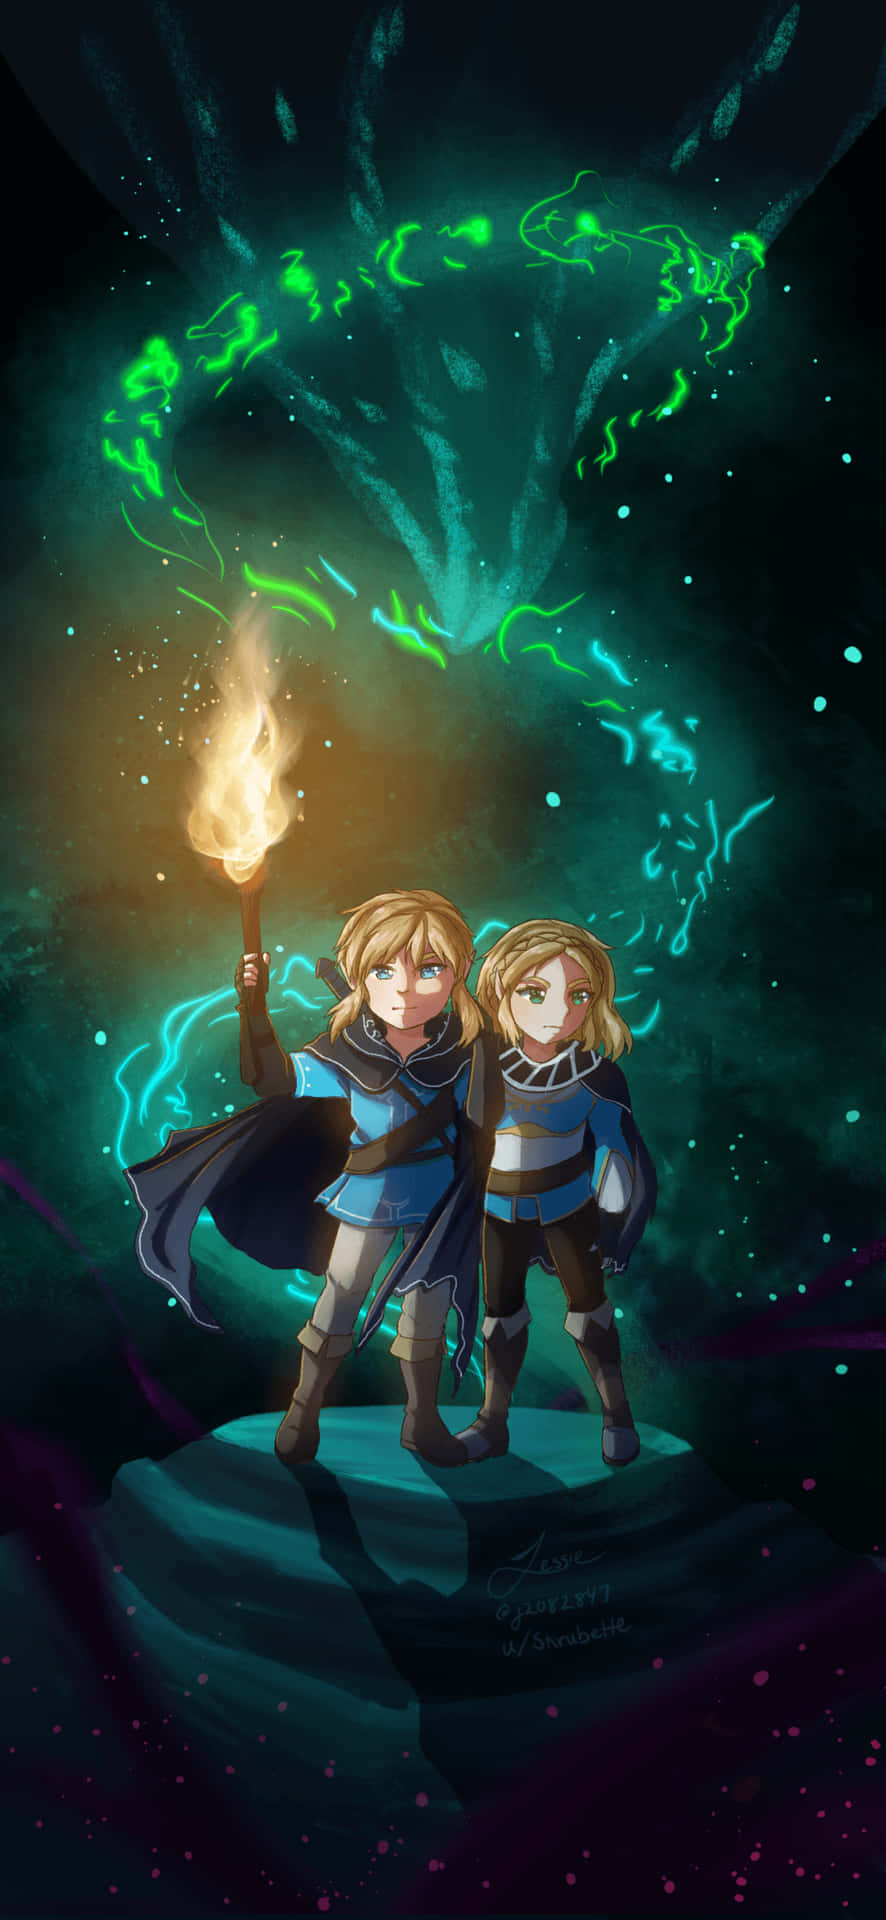 Unlock the power of the Hyrule cell phone Wallpaper